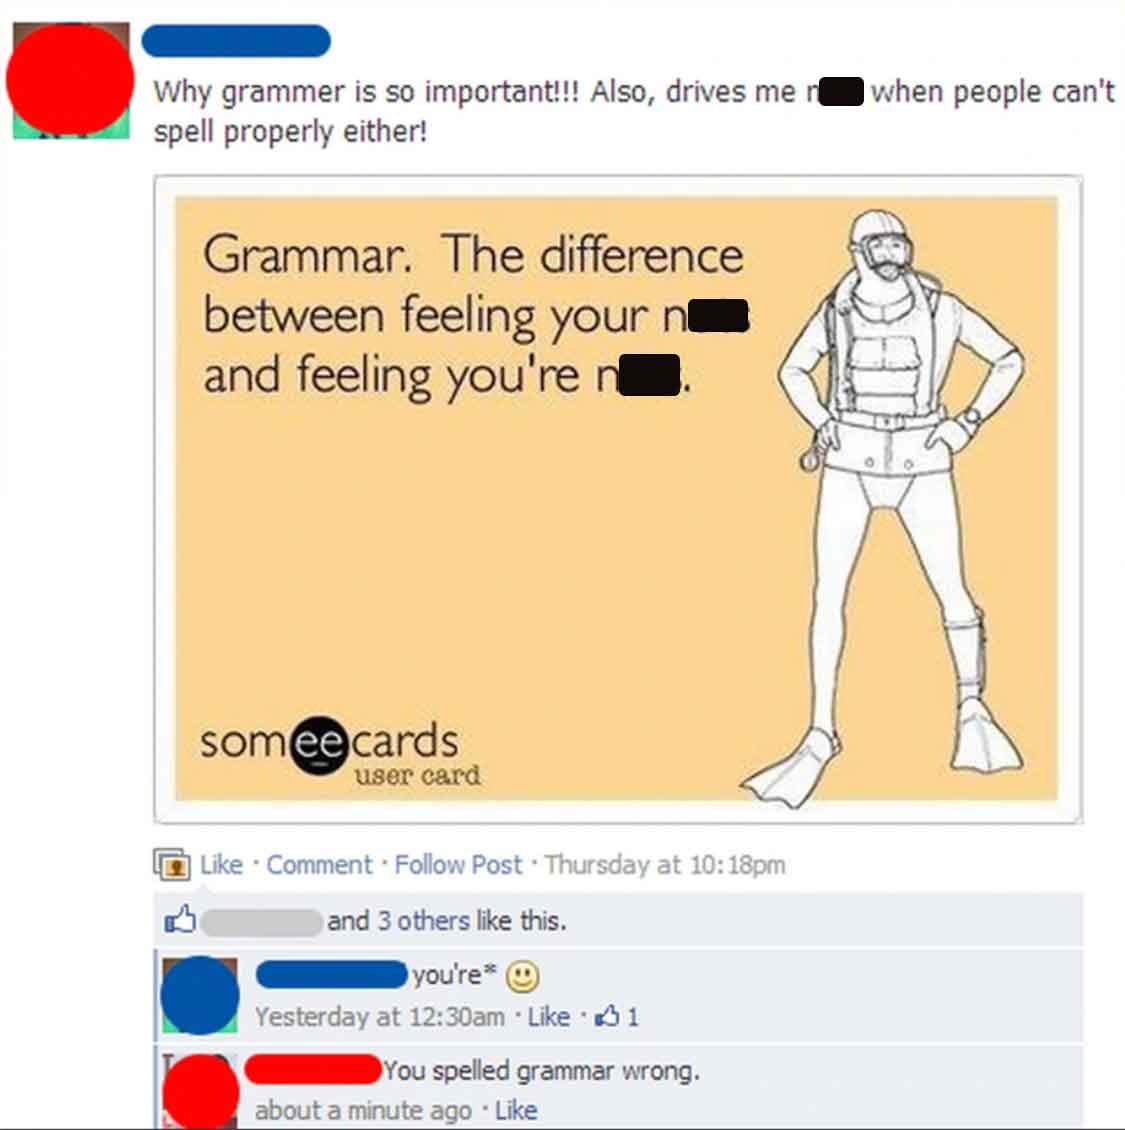 screenshot - Why grammer is so important!!! Also, drives me n spell properly either! Grammar. The difference between feeling your and feeling you're n someecards user card Comment. Post Thursday at pm and 3 others this. you're Yesterday at am 1 You spelle